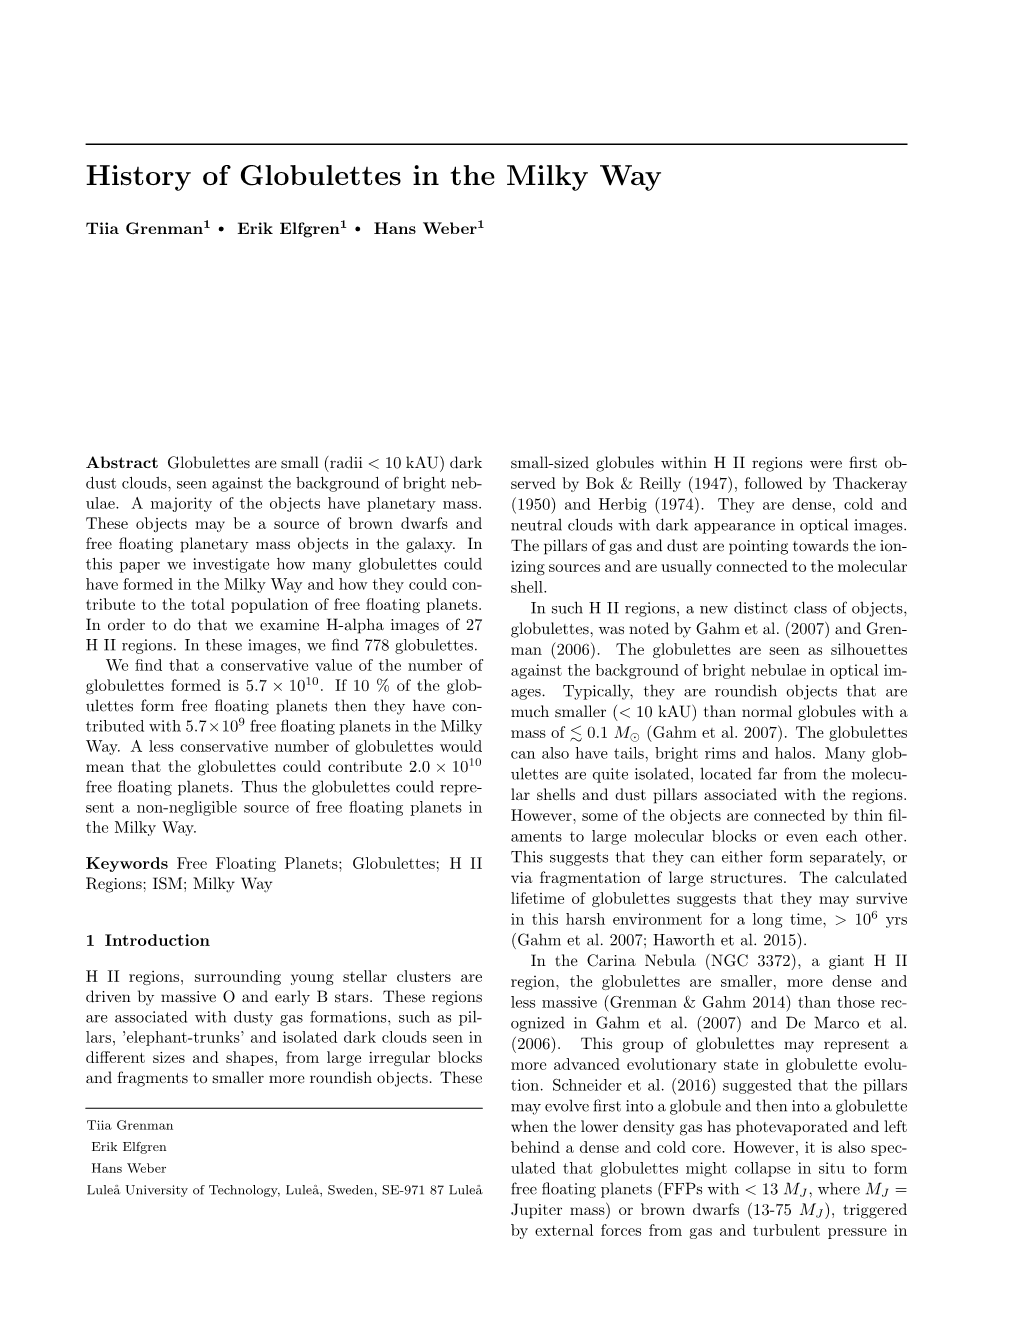 History of Globulettes in the Milky Way